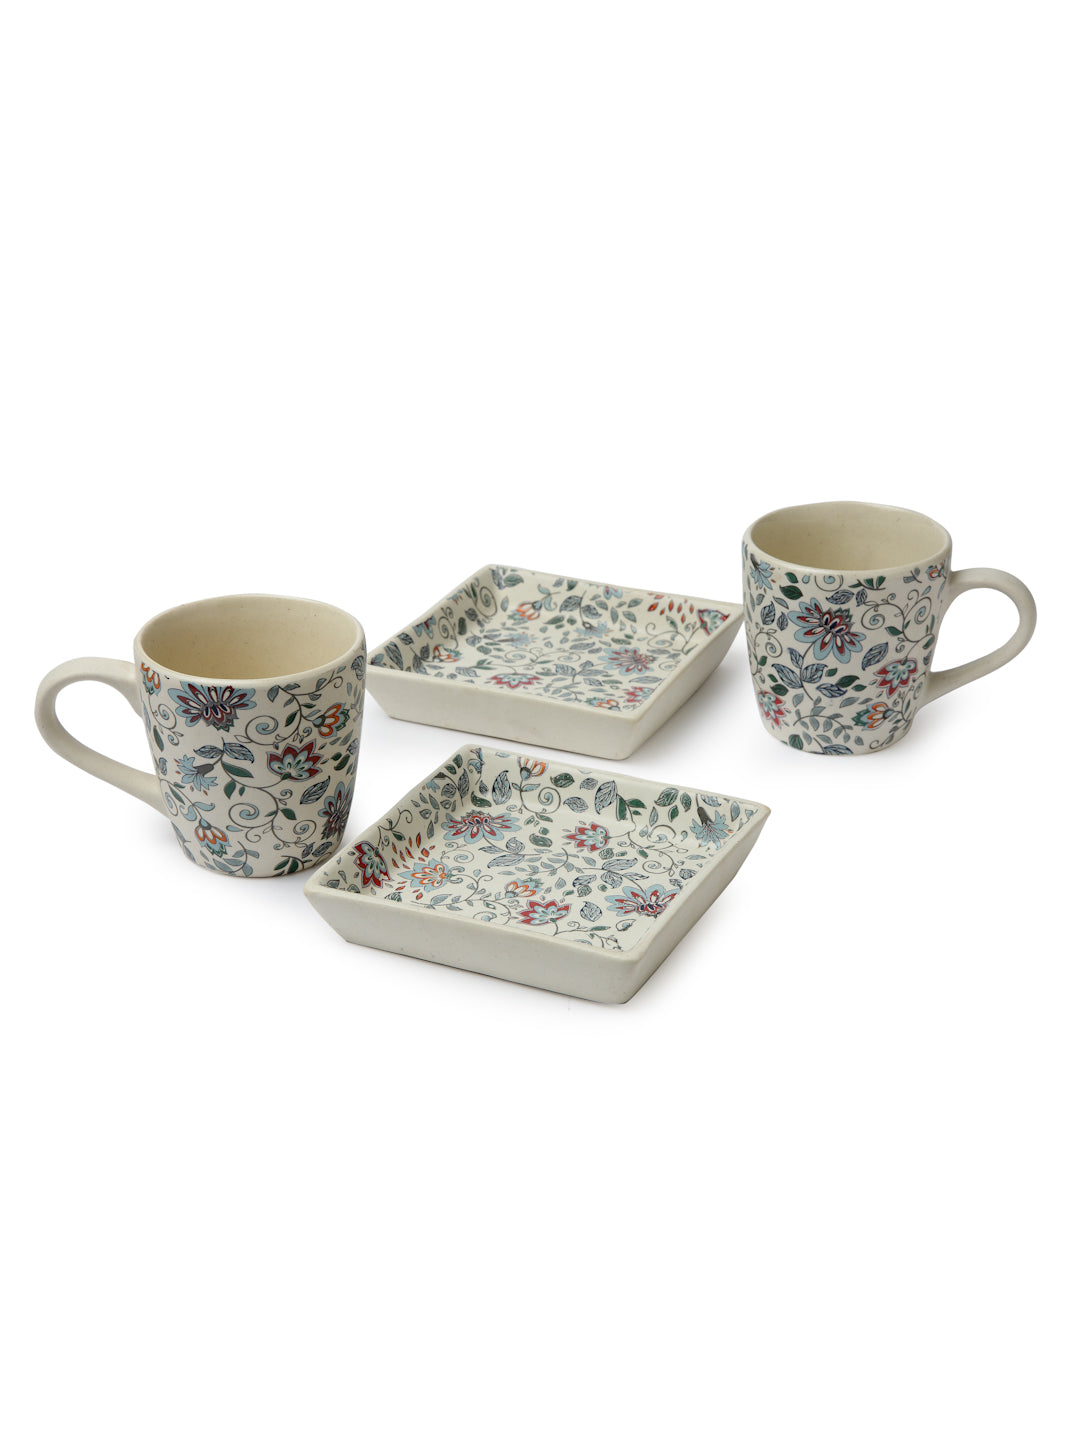 Floral Set of 2 Stoneware Mugs With 2 Tray